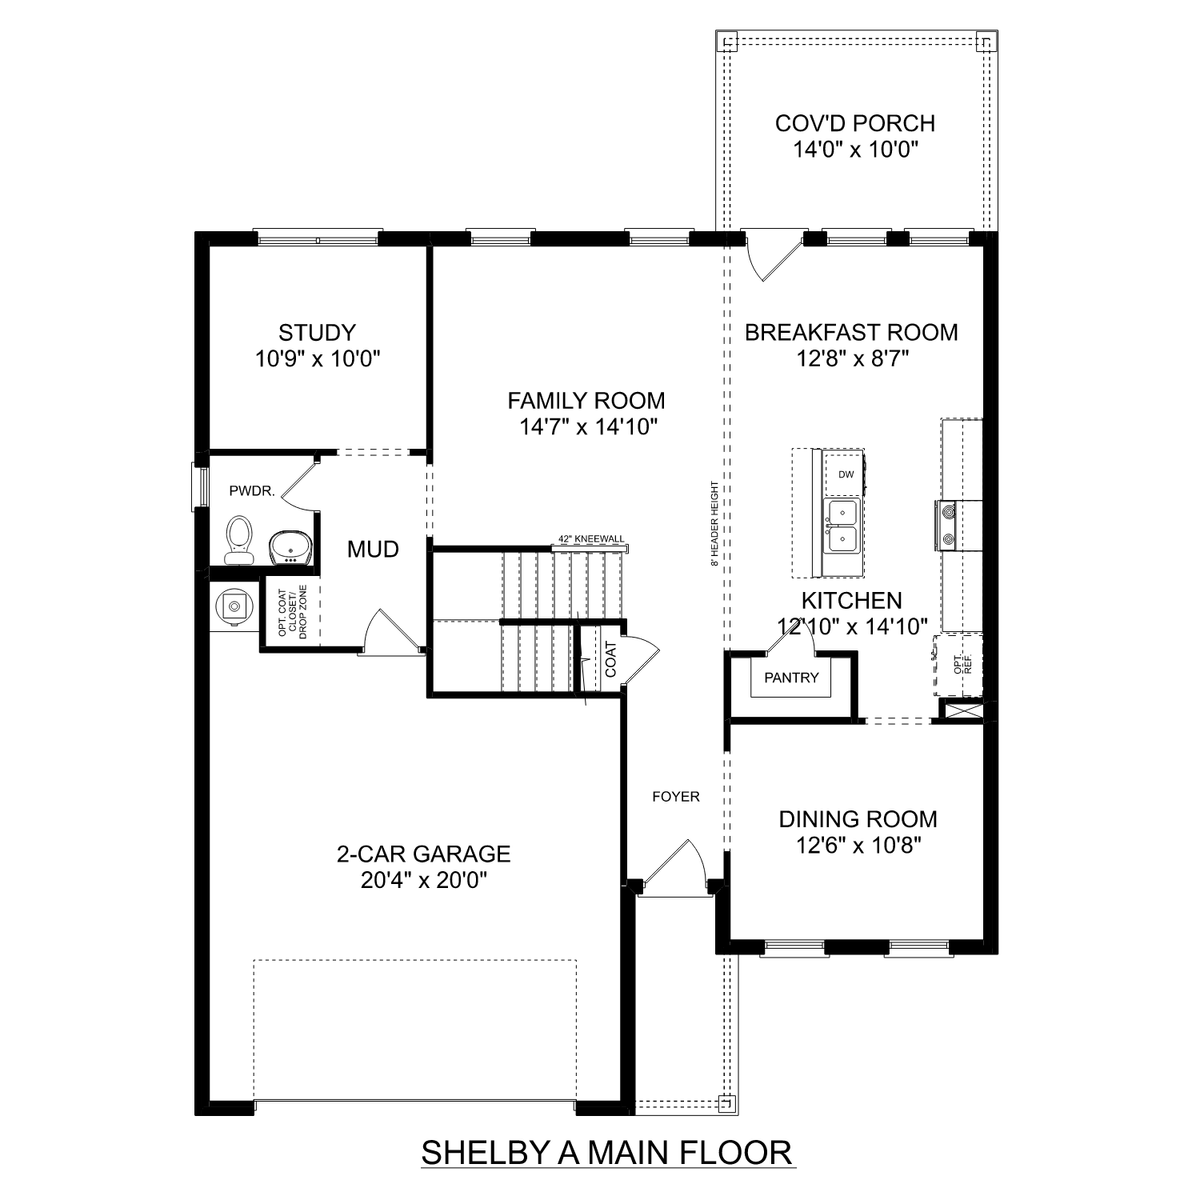 1 - The Shelby A buildable floor plan layout in Davidson Homes' The Meadows community.